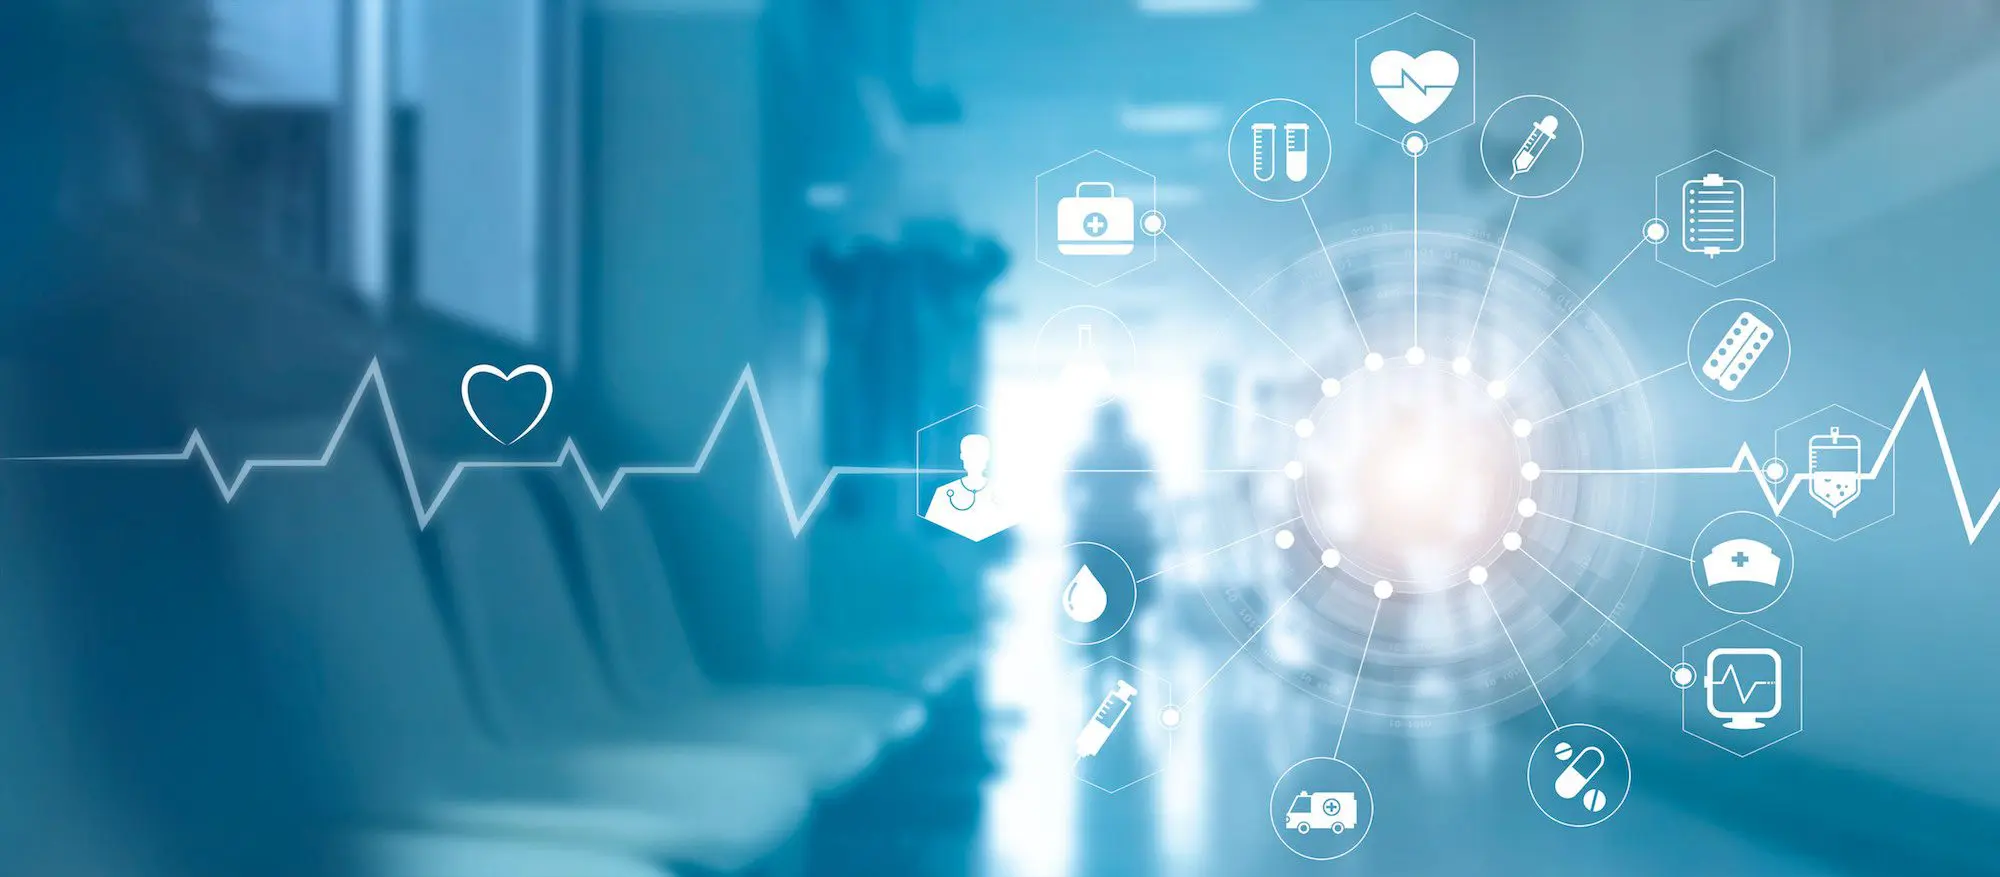 Investment in Israeli Digital Health Companies Crosses the $1B Mark for the First Time